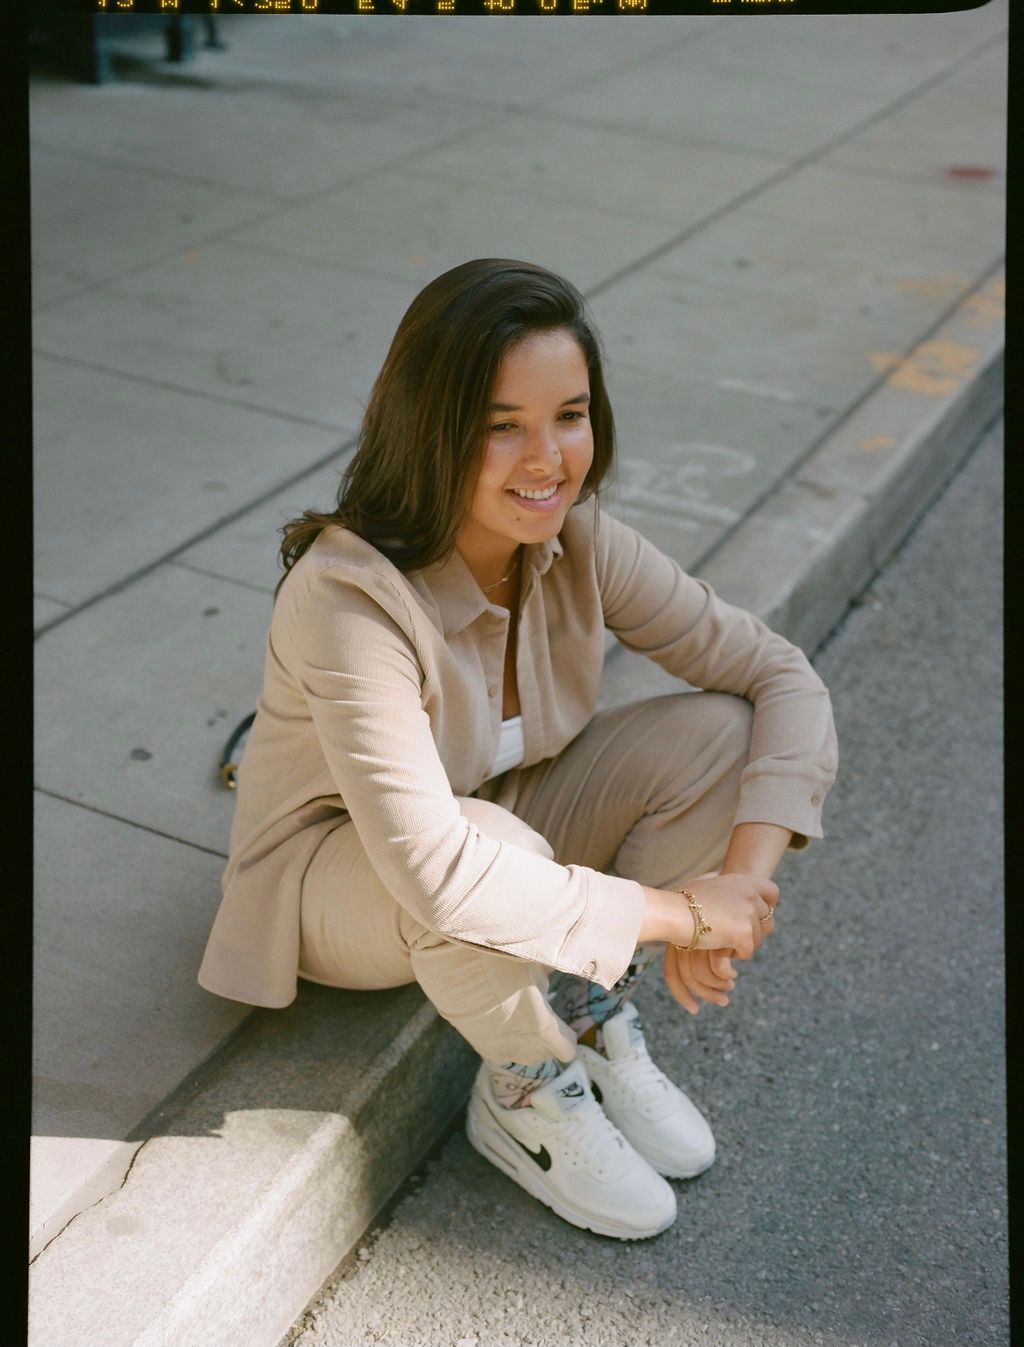 Woman with long dark hair wearing a beige shirt, trousers and sneakers sits on a street kerb 